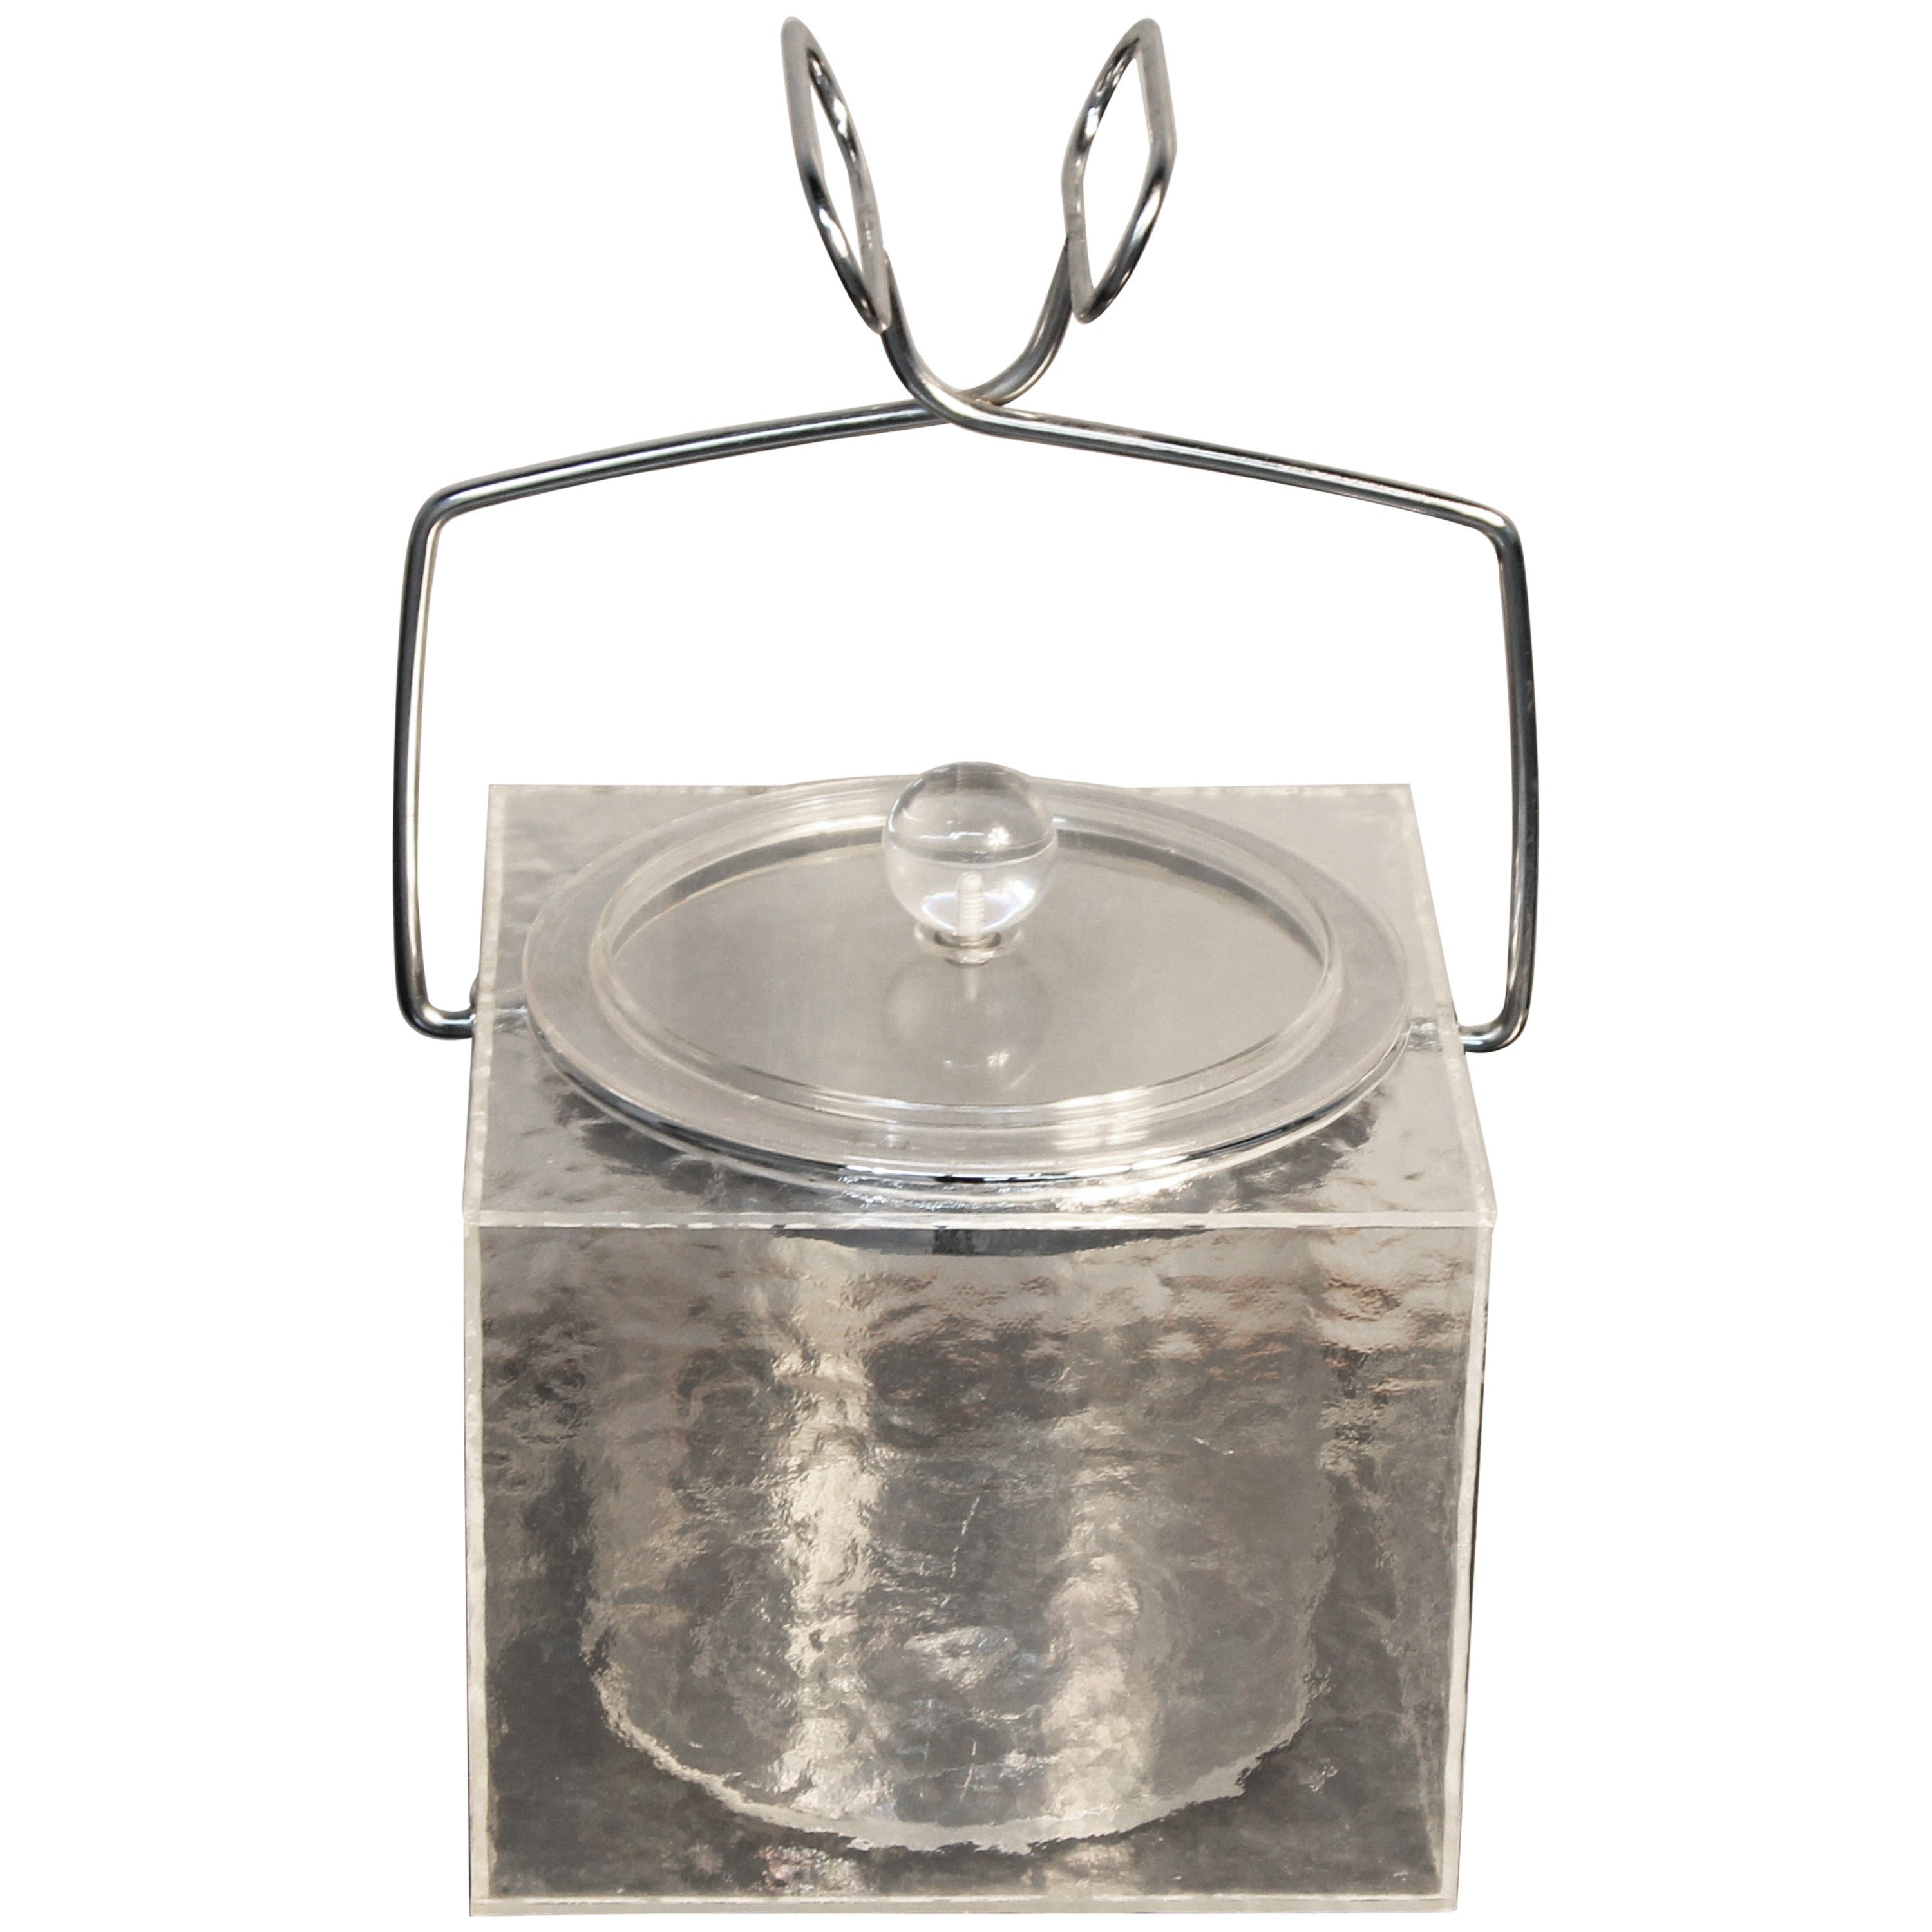 Lucite “Block of Ice” Bucket with Tong Handles and Insert For Sale